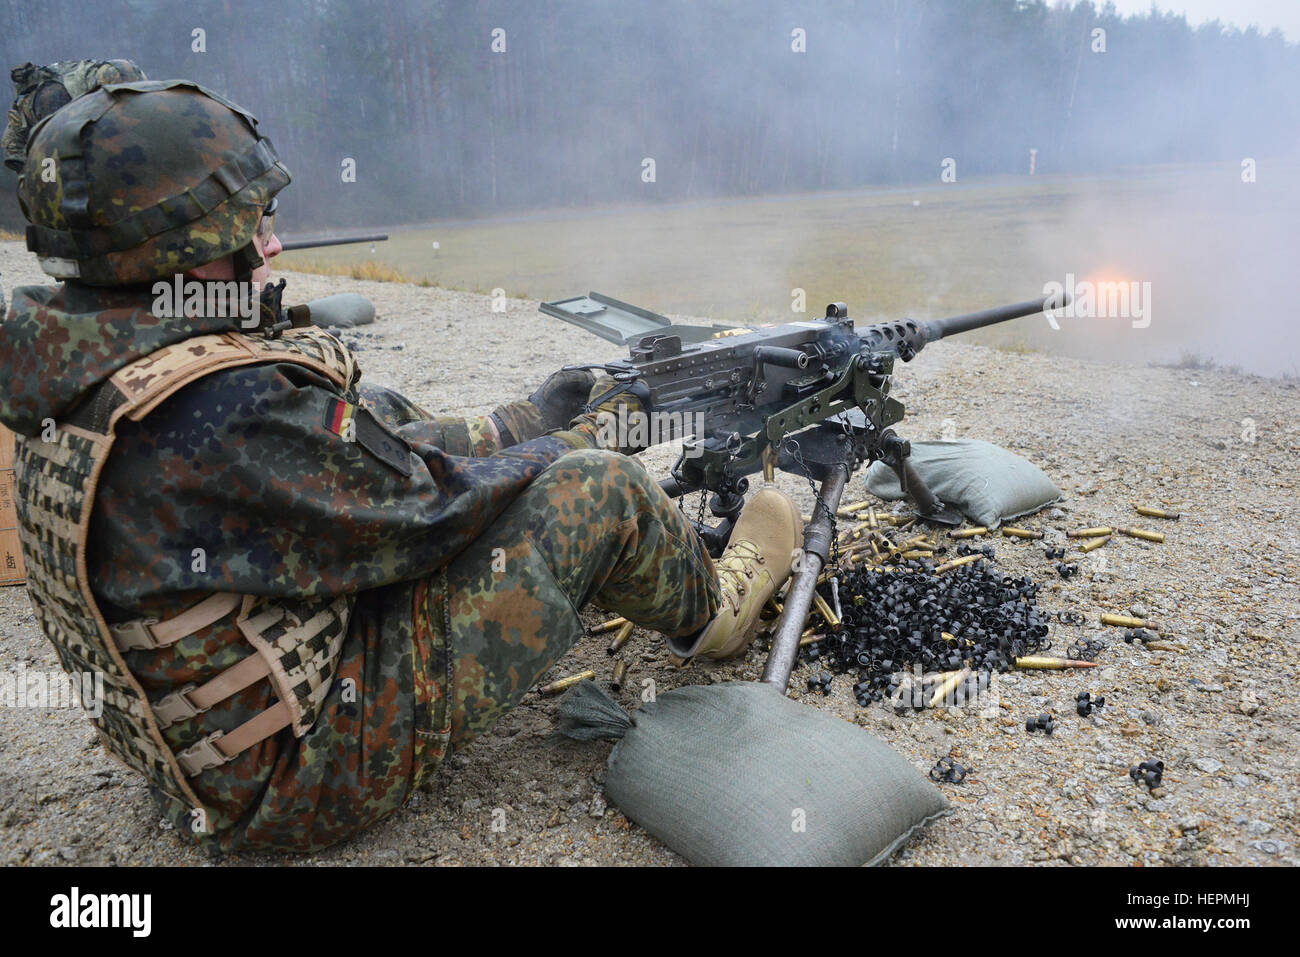 A German soldier fires a .50-caliber machine gun during a familiarization training on U.S. weapons at the 7th Army Joint Multinational Training Command Grafenwoehr Training Area, Germany, Dec. 9, 2015. (U.S. Army photo by Visual Information Specialist Gertrud Zach/released) CATC trains German soldiers on U.S. weapons 151209-A-HE539-0669 Stock Photo